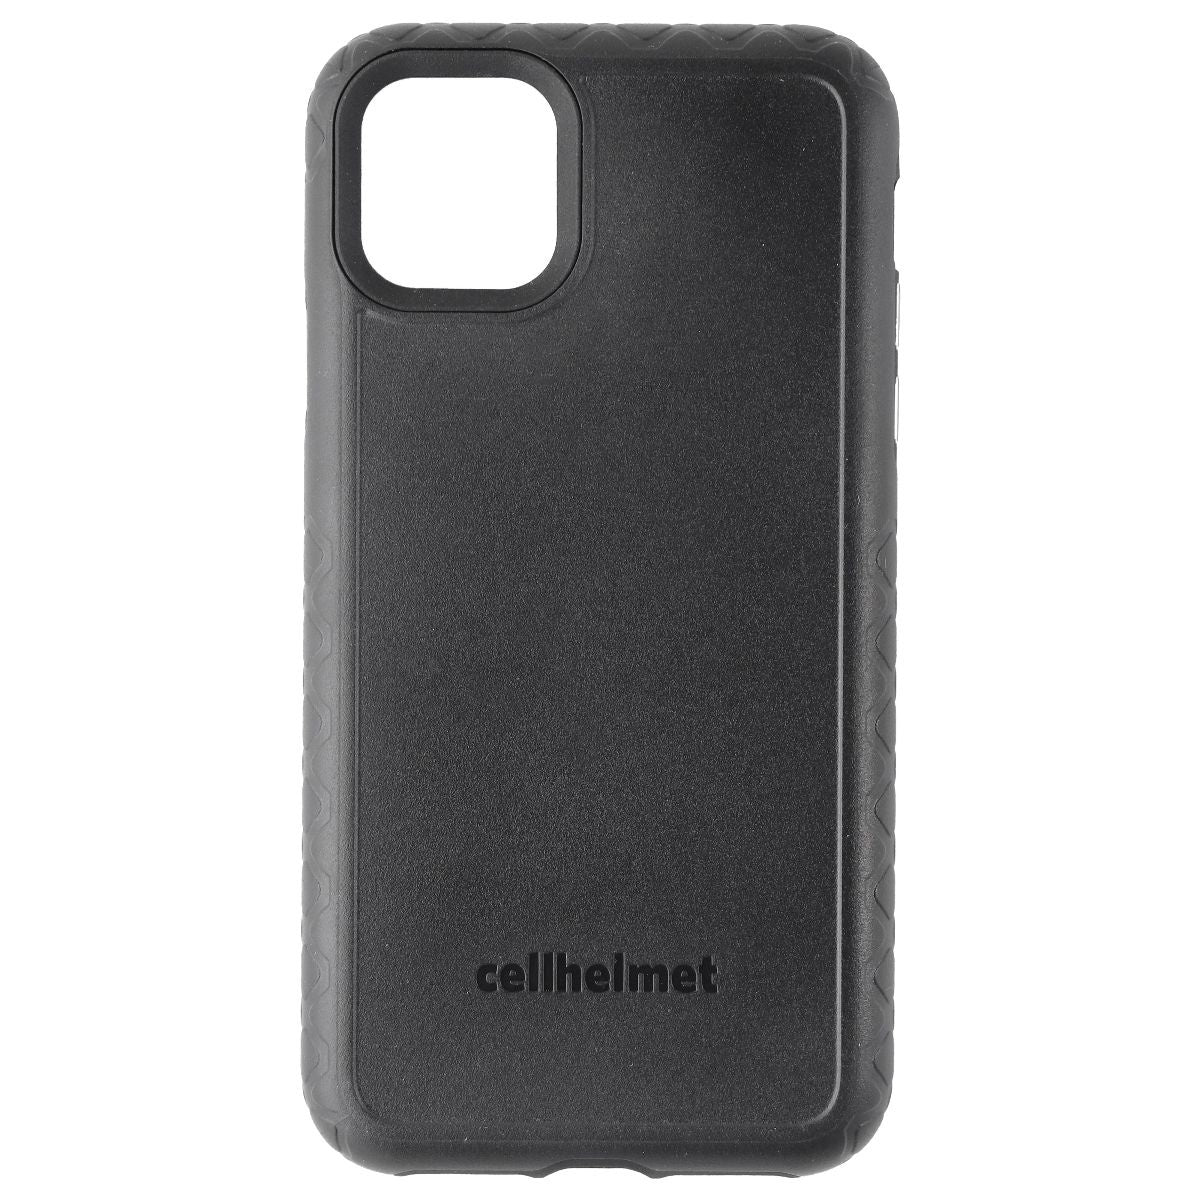 cellhelmet Fortitude Pro Series Onyx Black Dual Layer Case for iPhone 11 Pro Max Cell Phone - Cases, Covers & Skins CellHelmet    - Simple Cell Bulk Wholesale Pricing - USA Seller